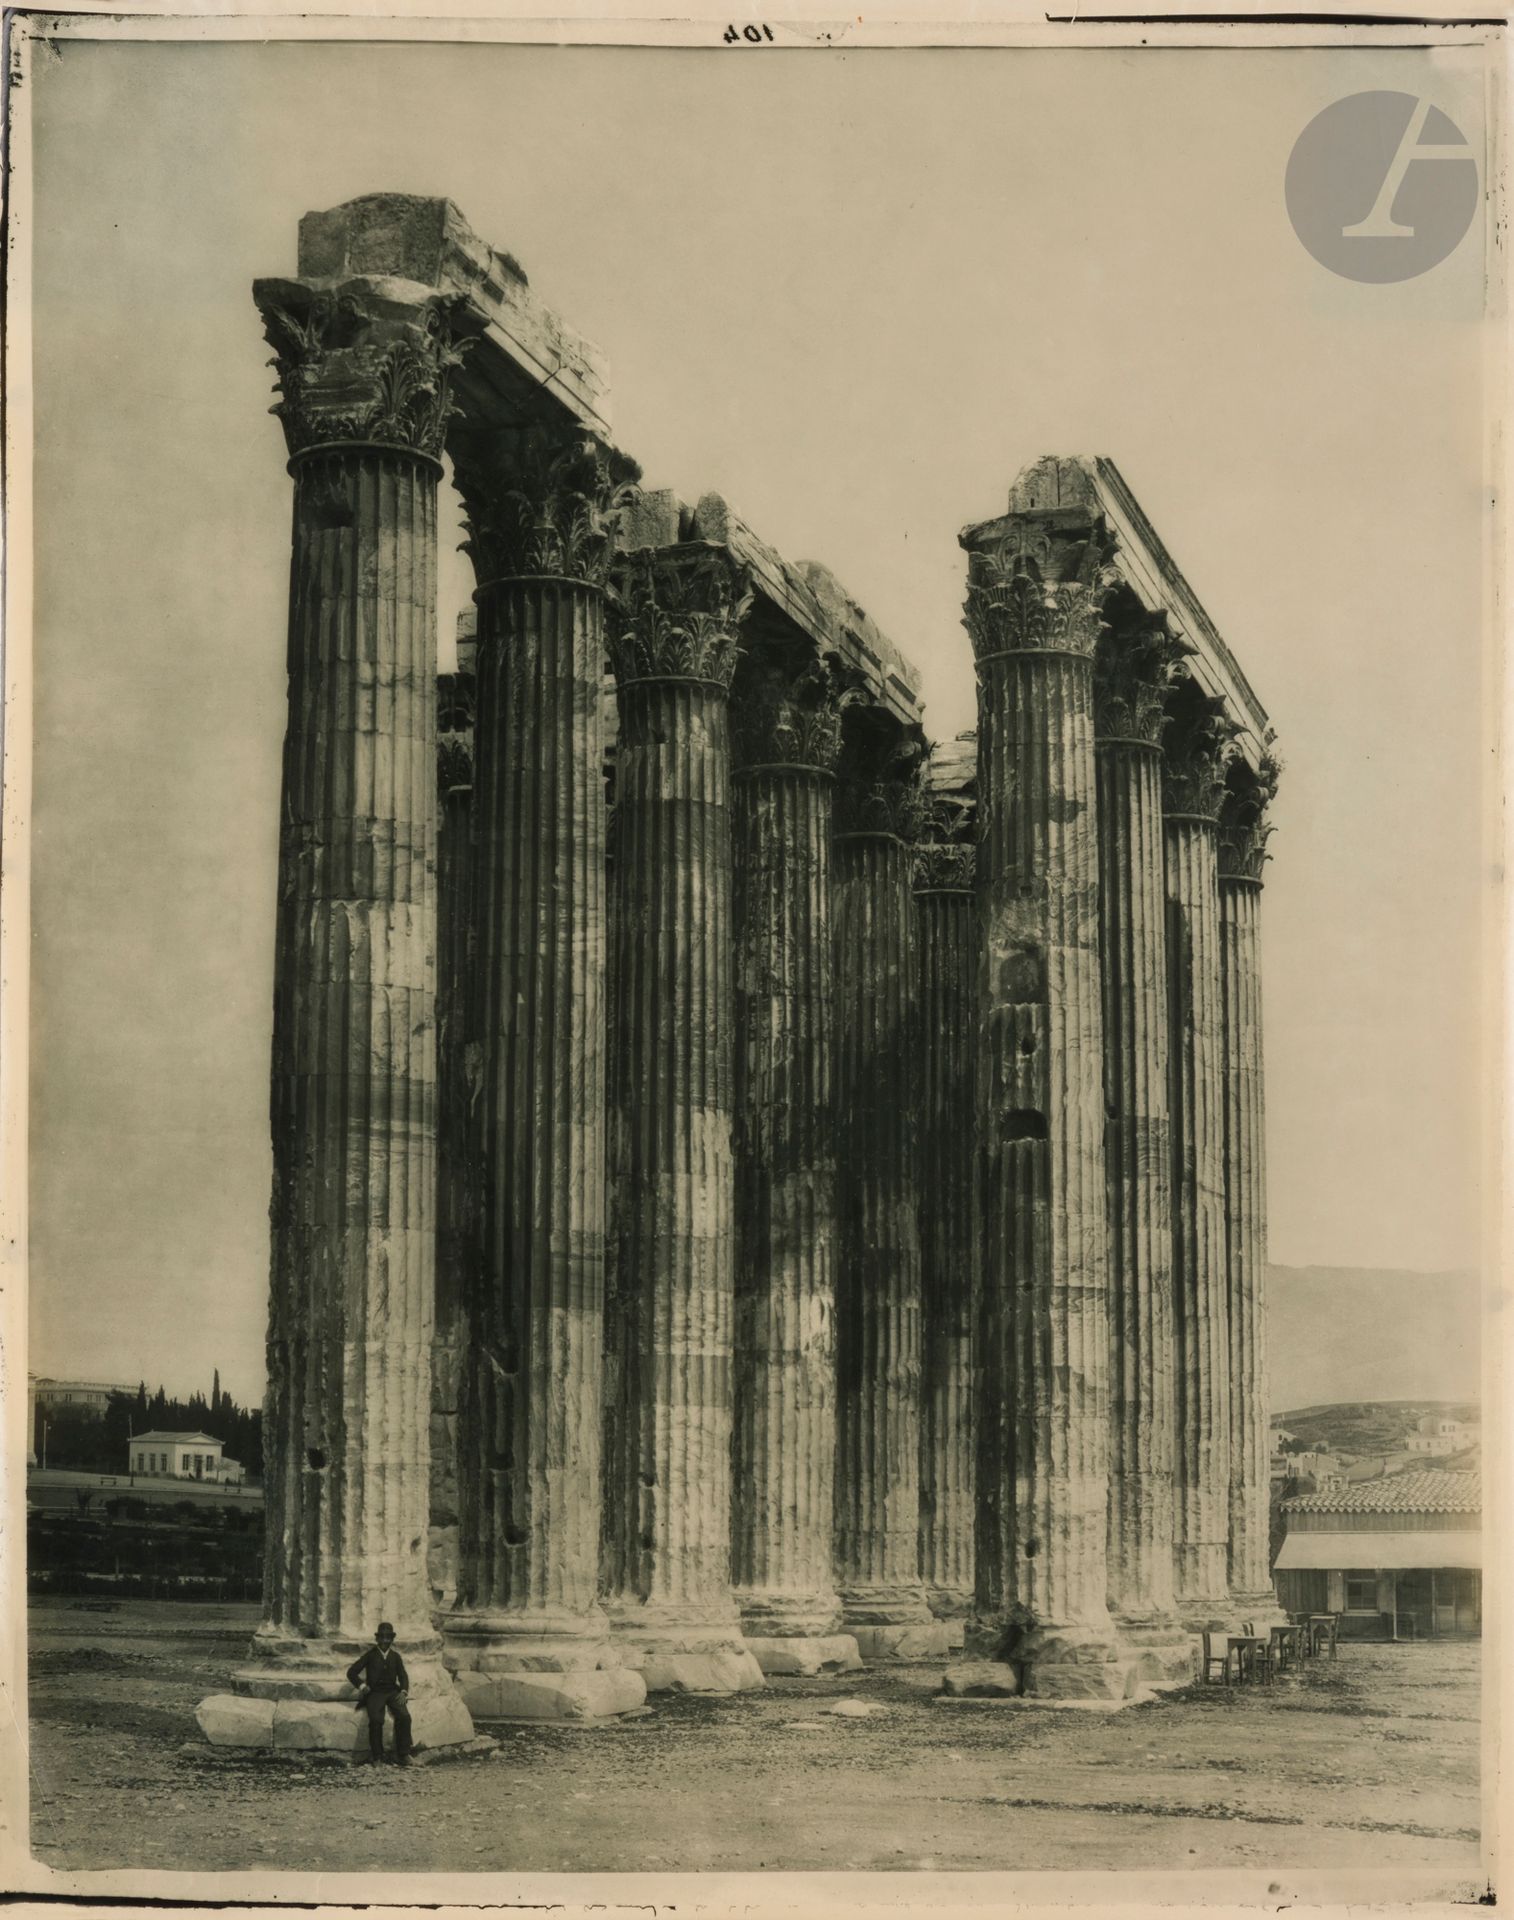 Null Adolphe Braun House
Acropolis of Athens, c. 1870-1890.
Temple of Olympian Z&hellip;